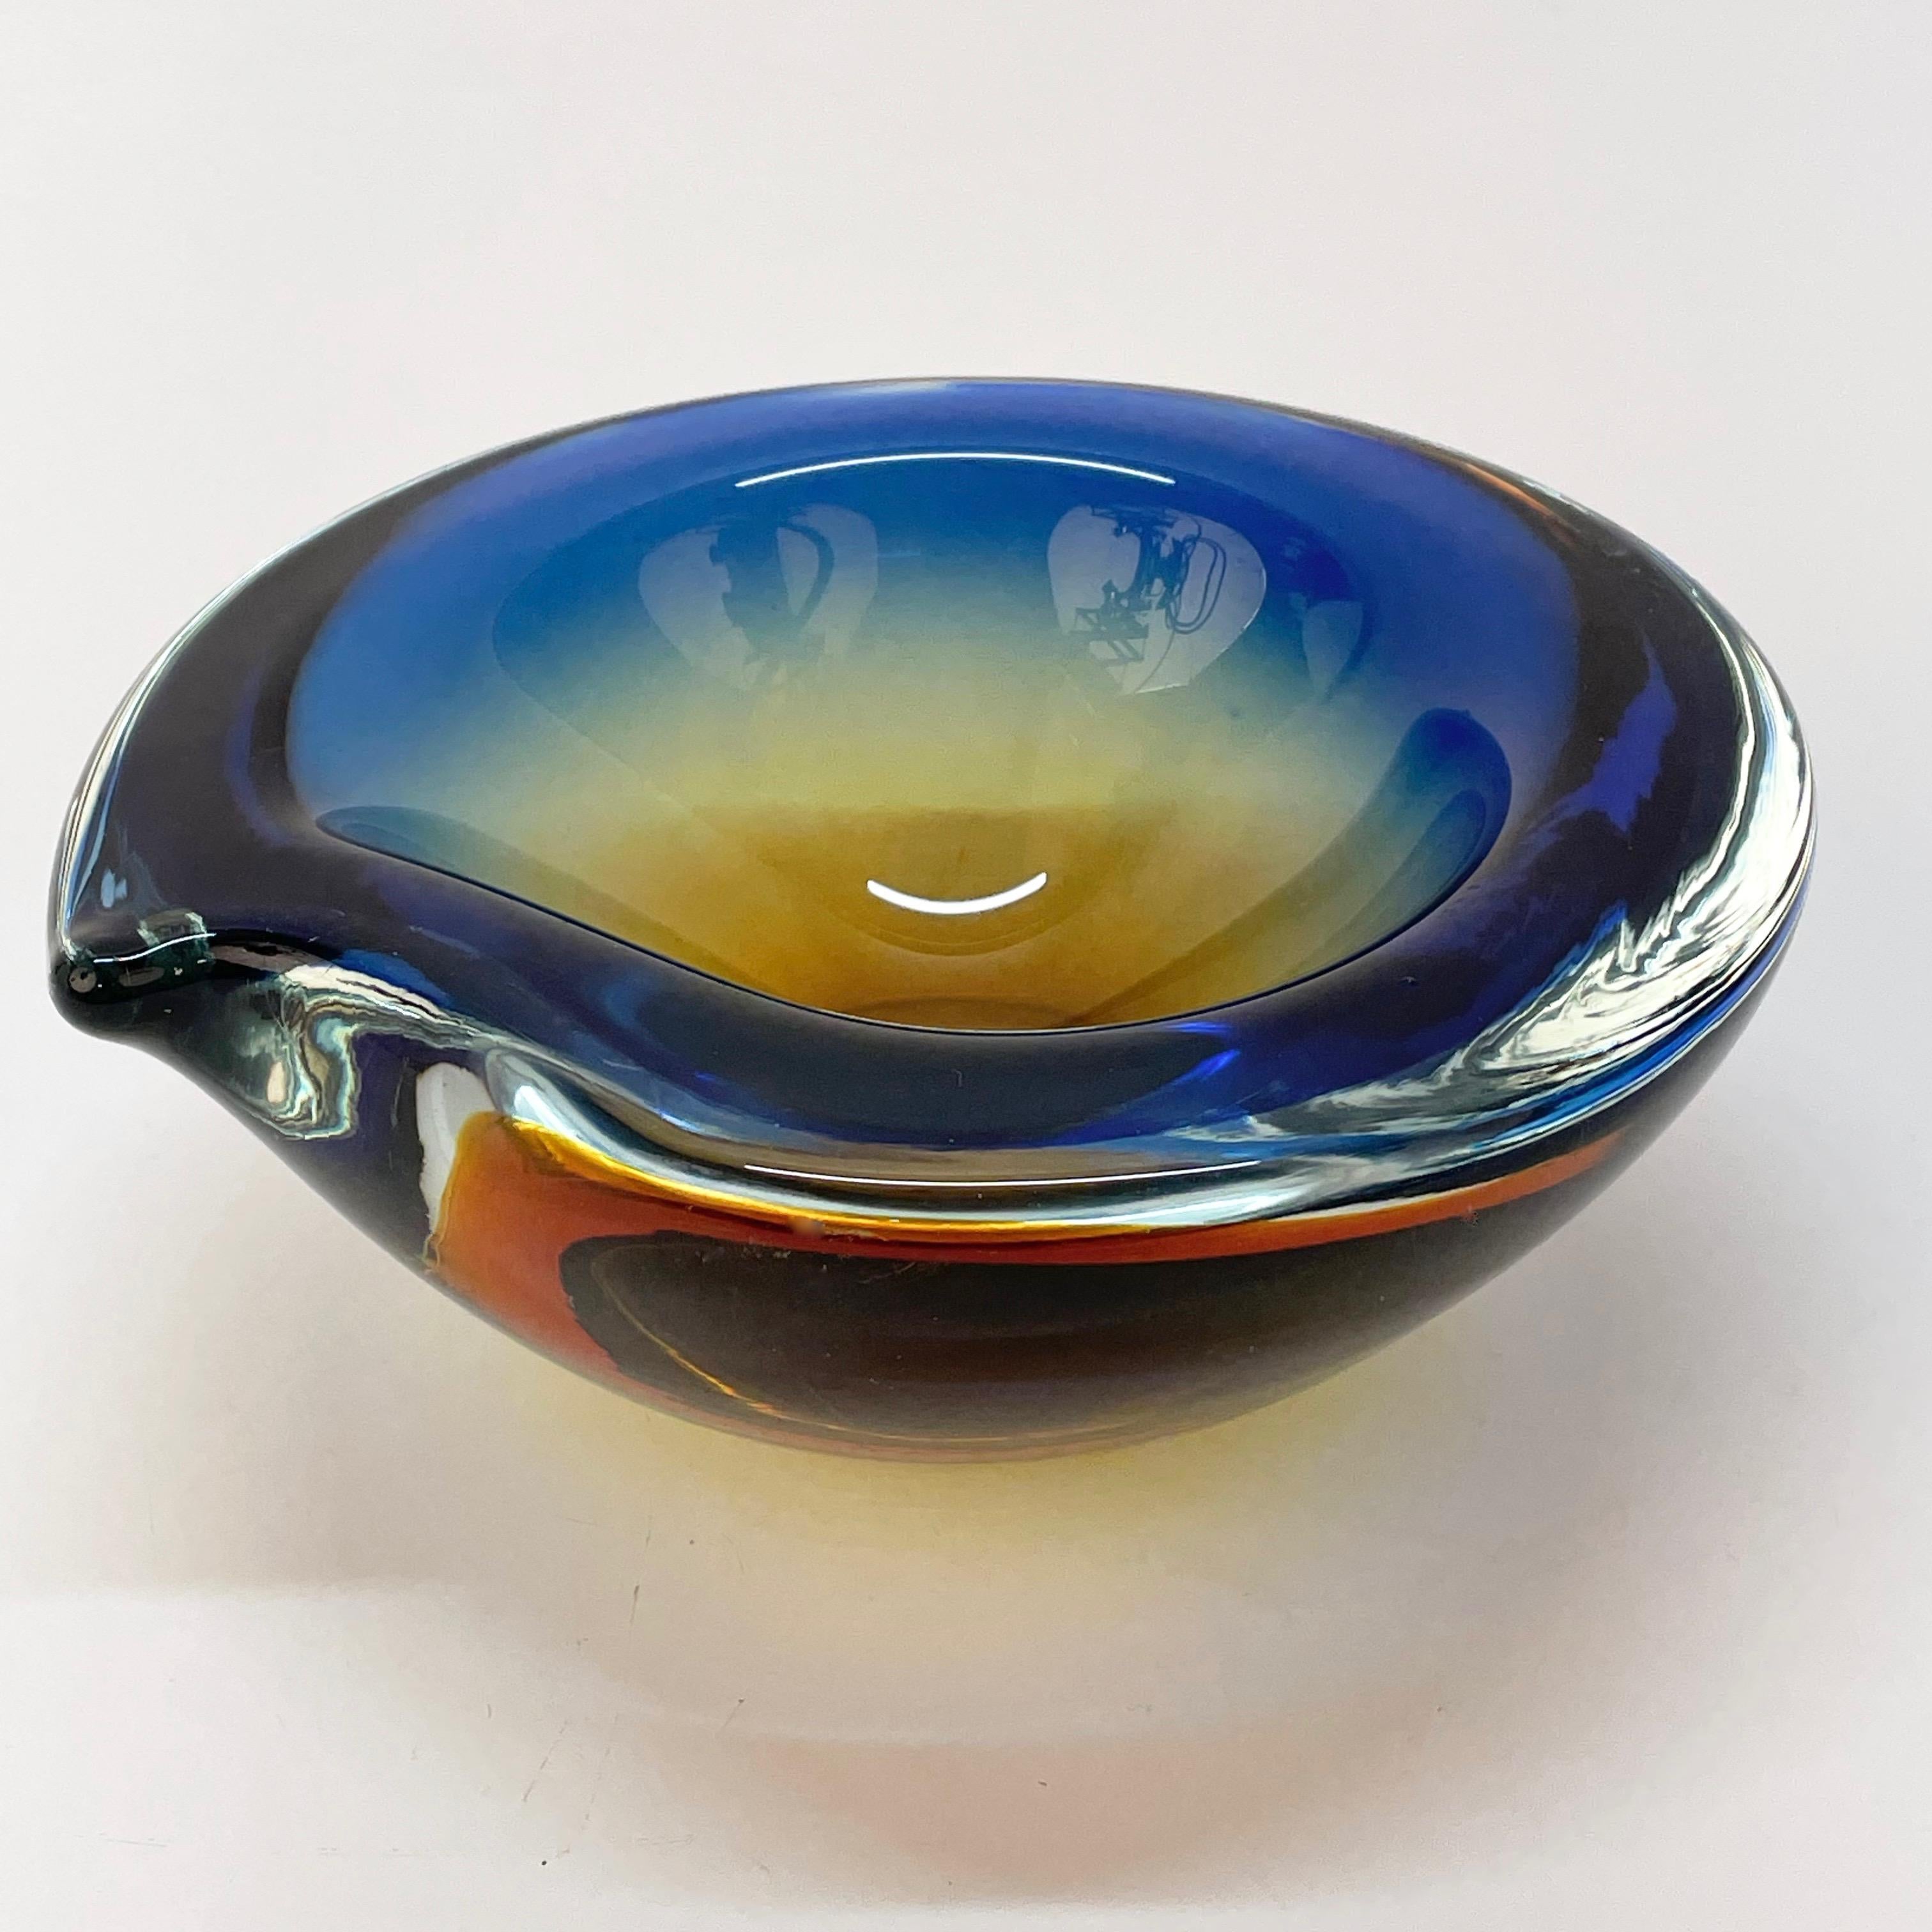 Murano Ashtray or Bowl, Flavio Poli Submerged Glass Amber Blue, Italy, 1960 For Sale 3